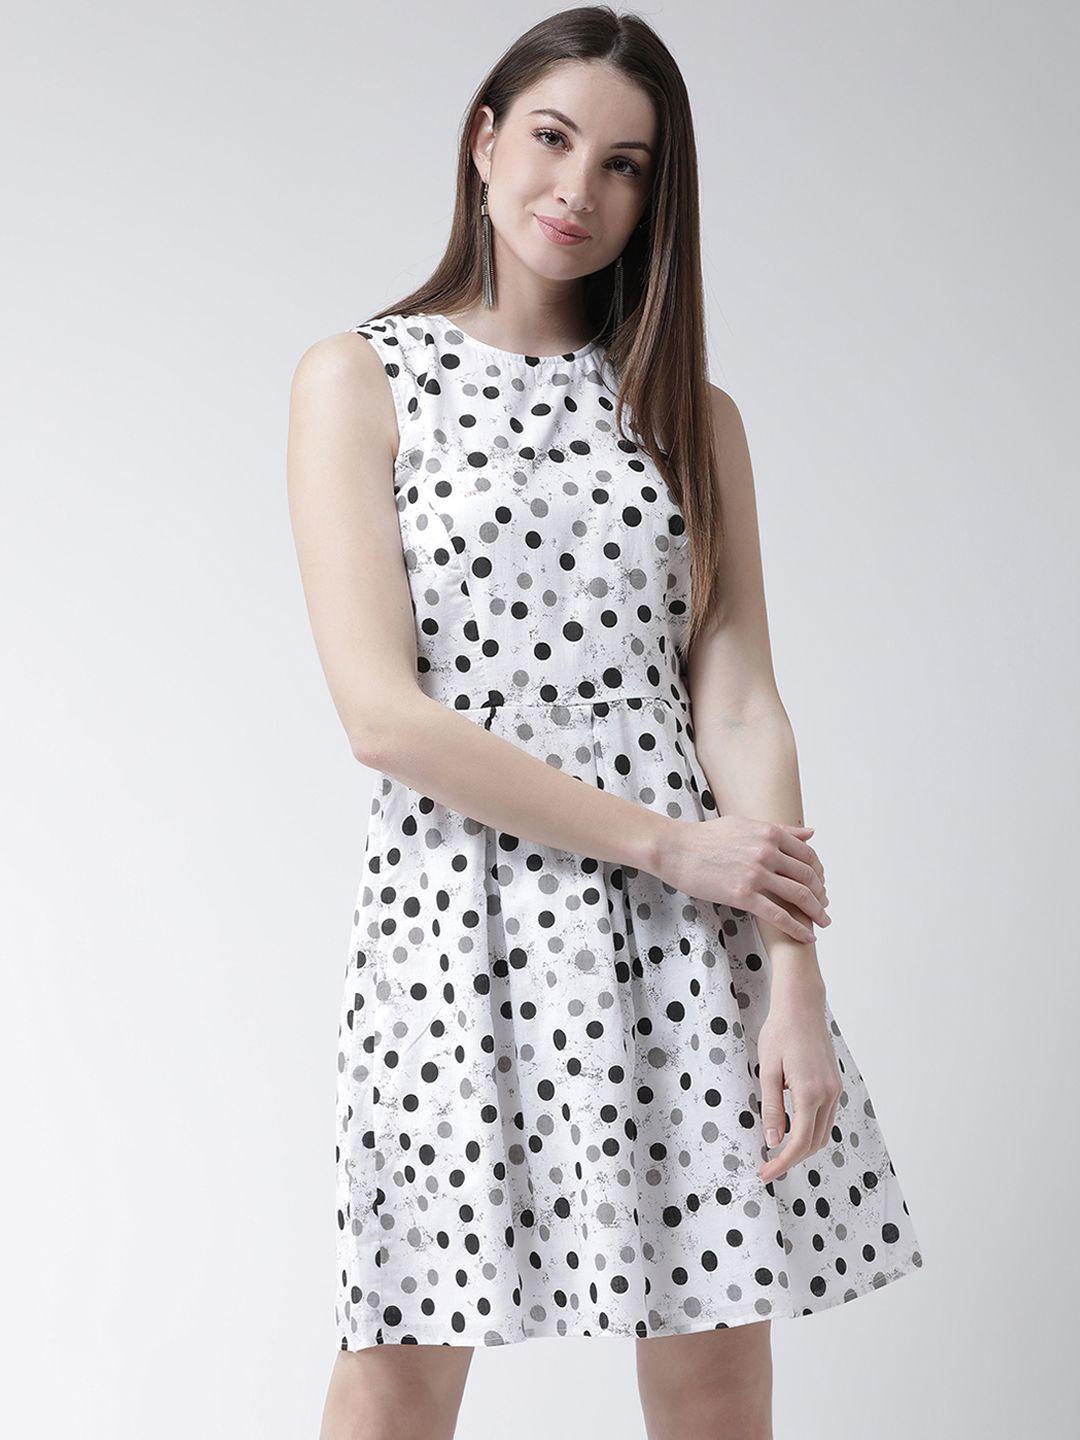 msfq women white & black printed fit and flare dress